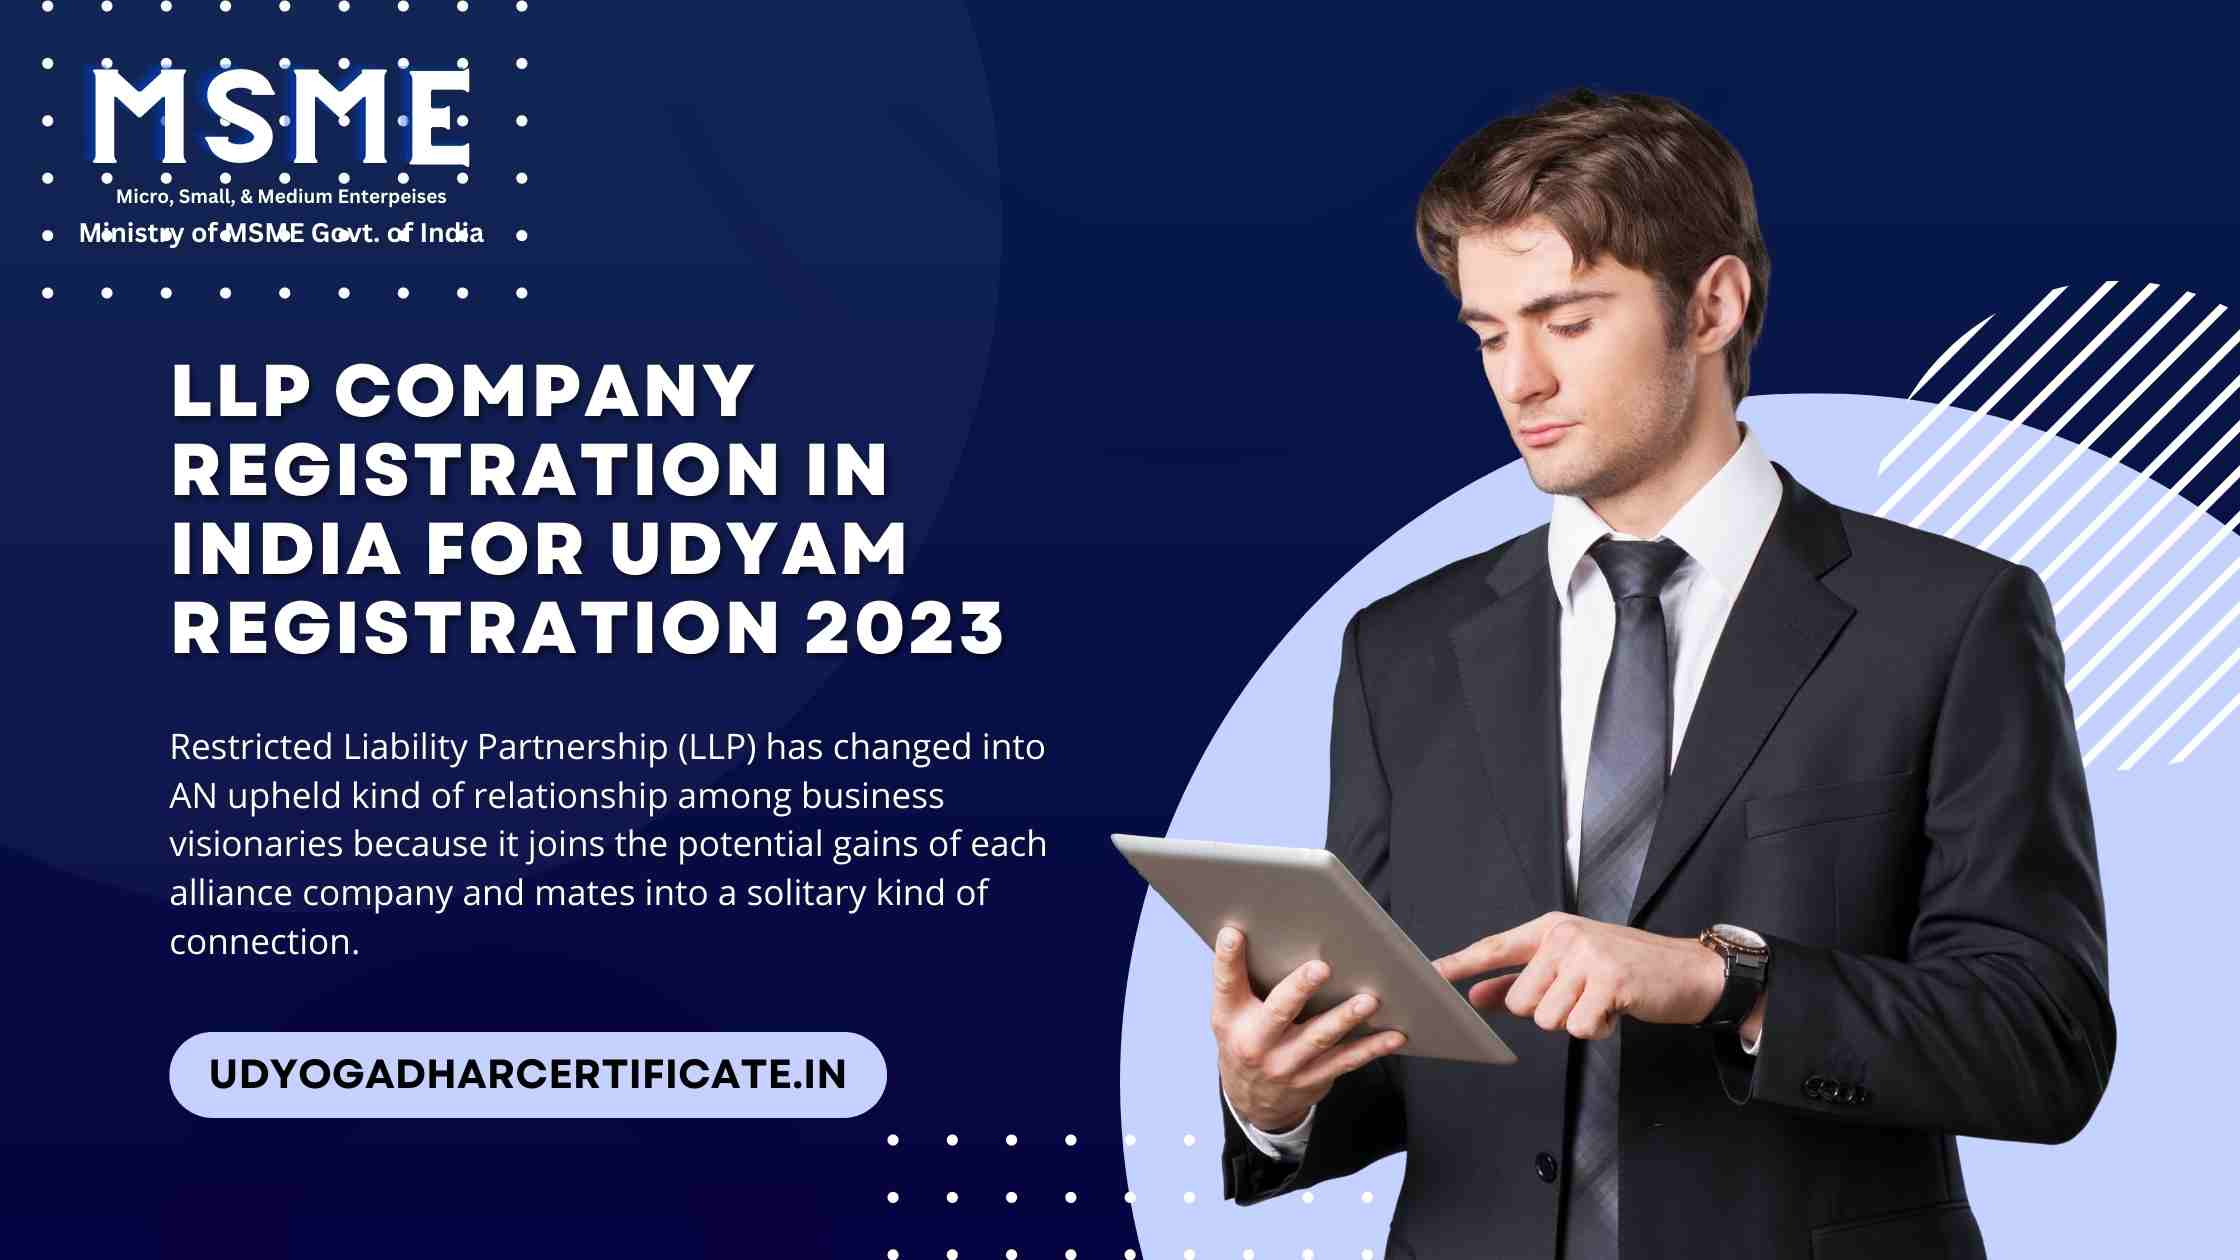 Udyam Registration in India for LLP Company Registration 2023